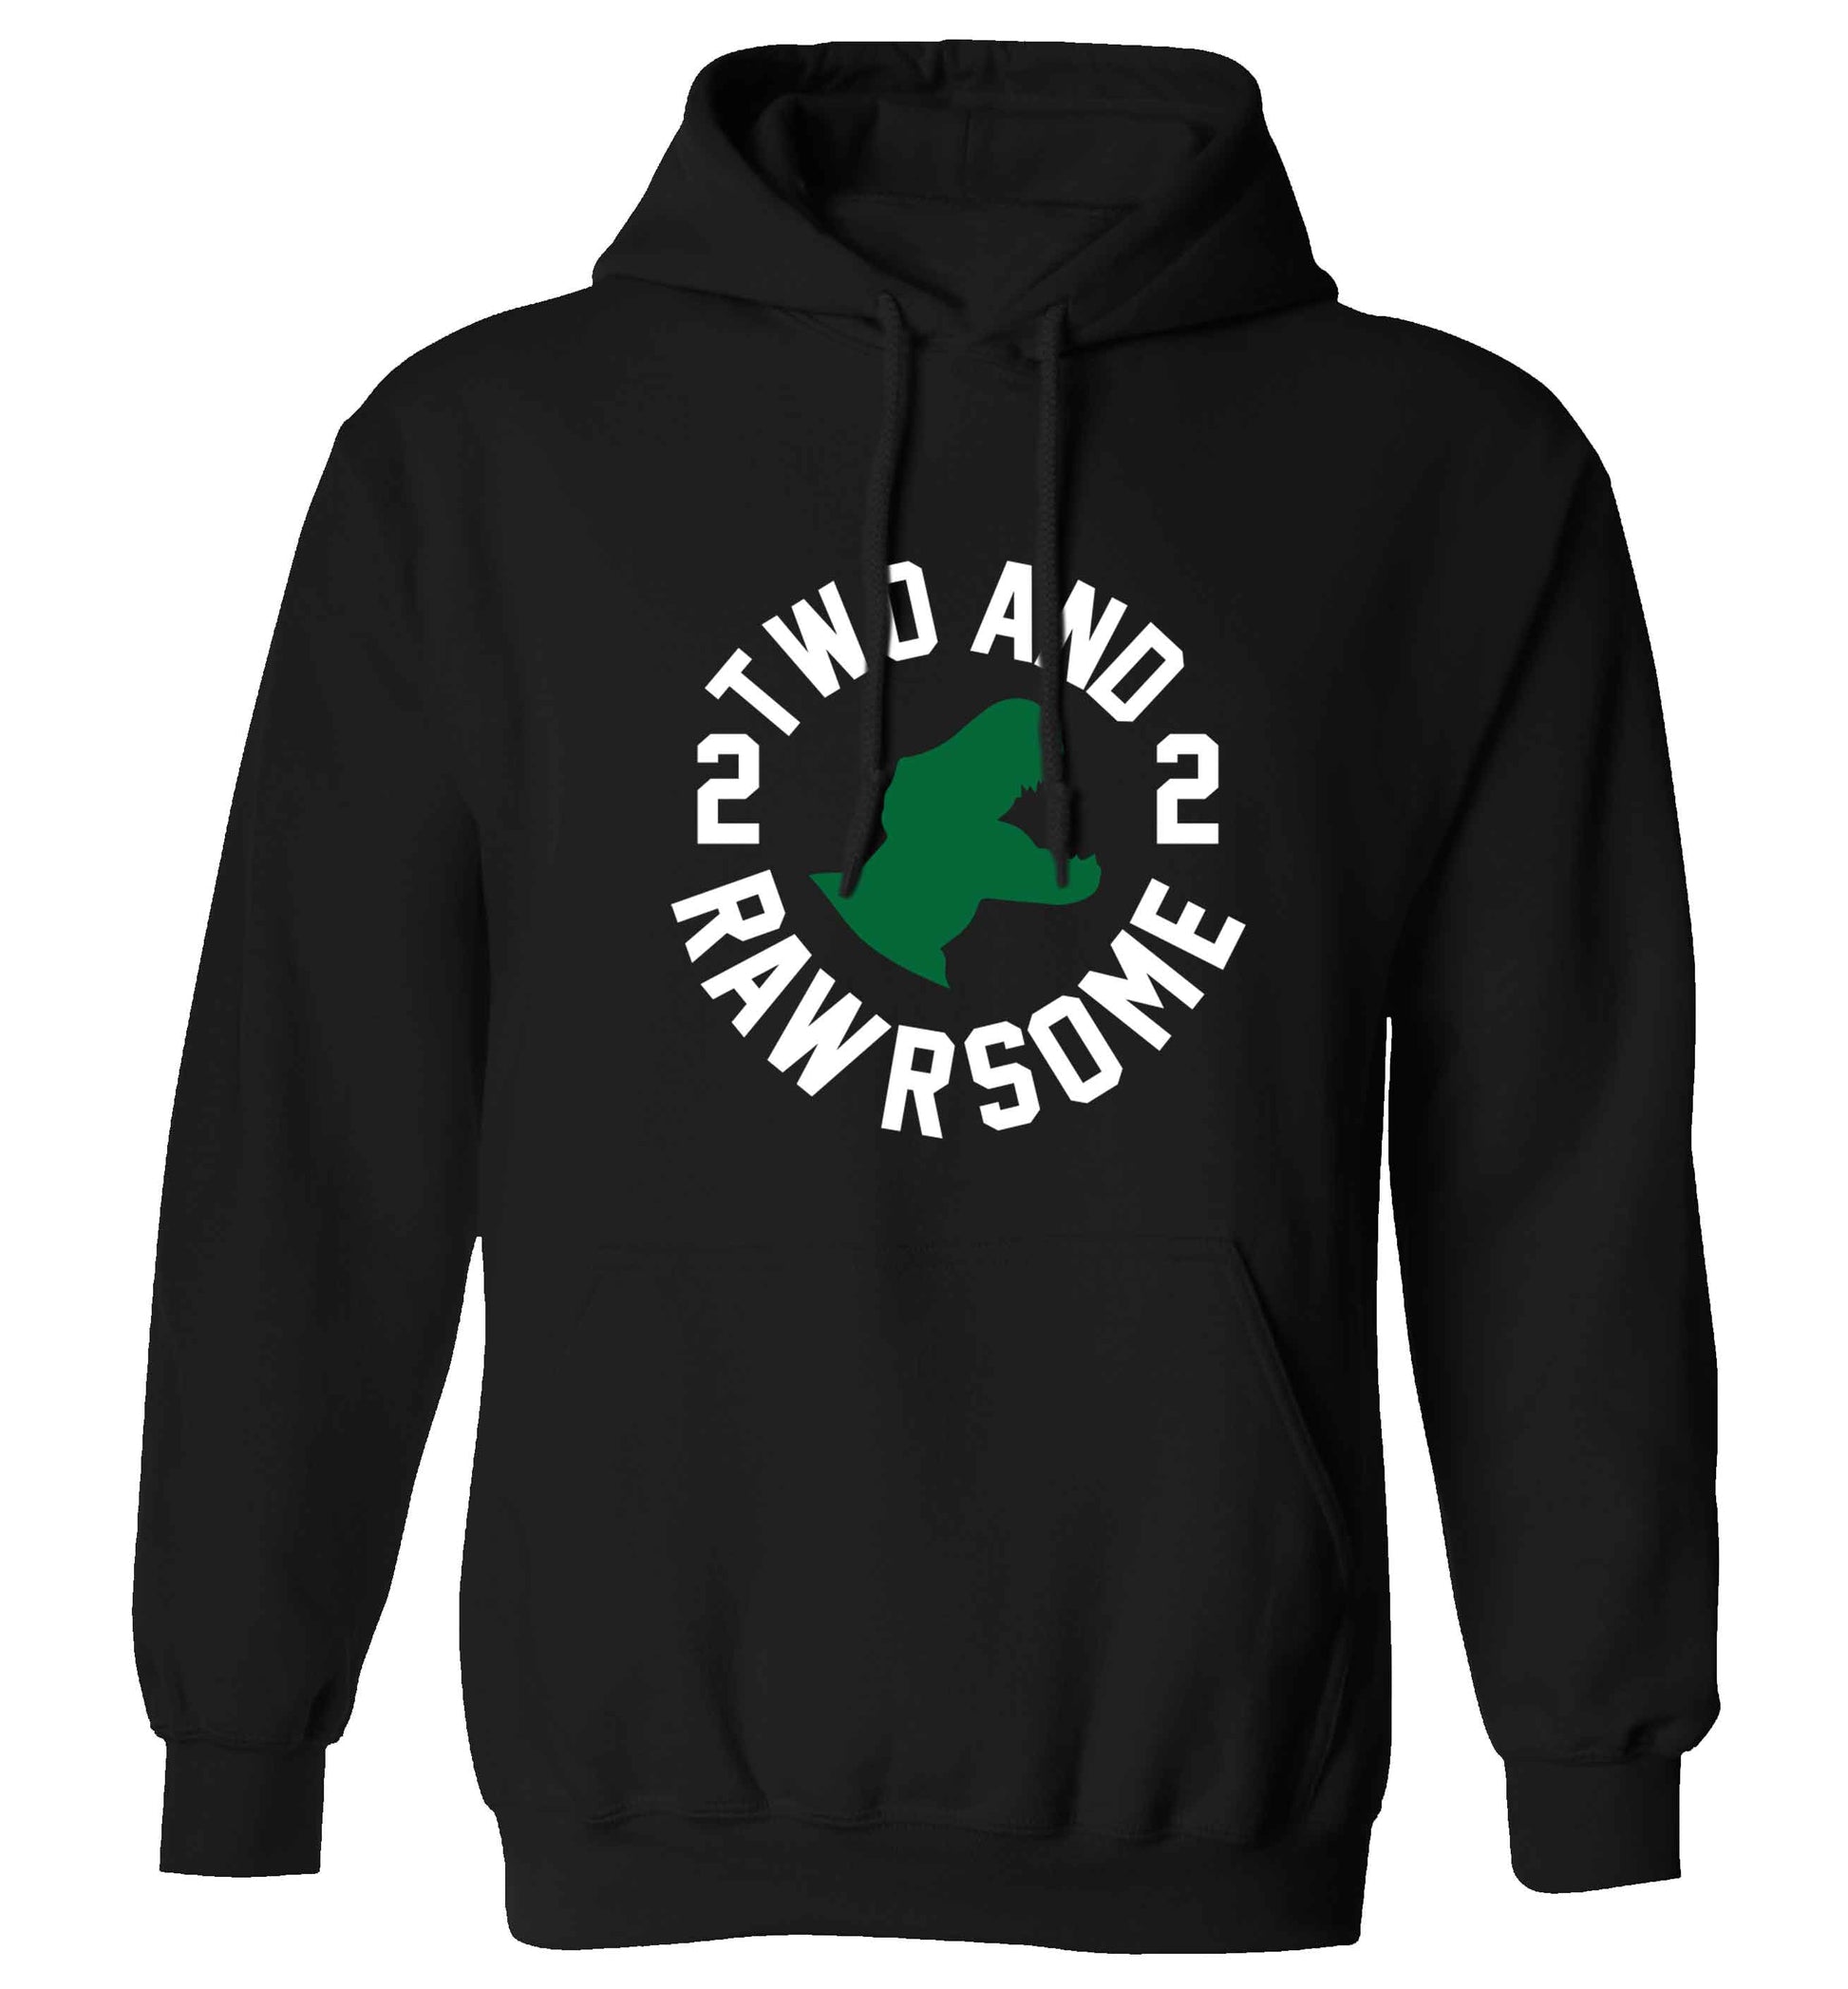 Two and rawrsome adults unisex black hoodie 2XL